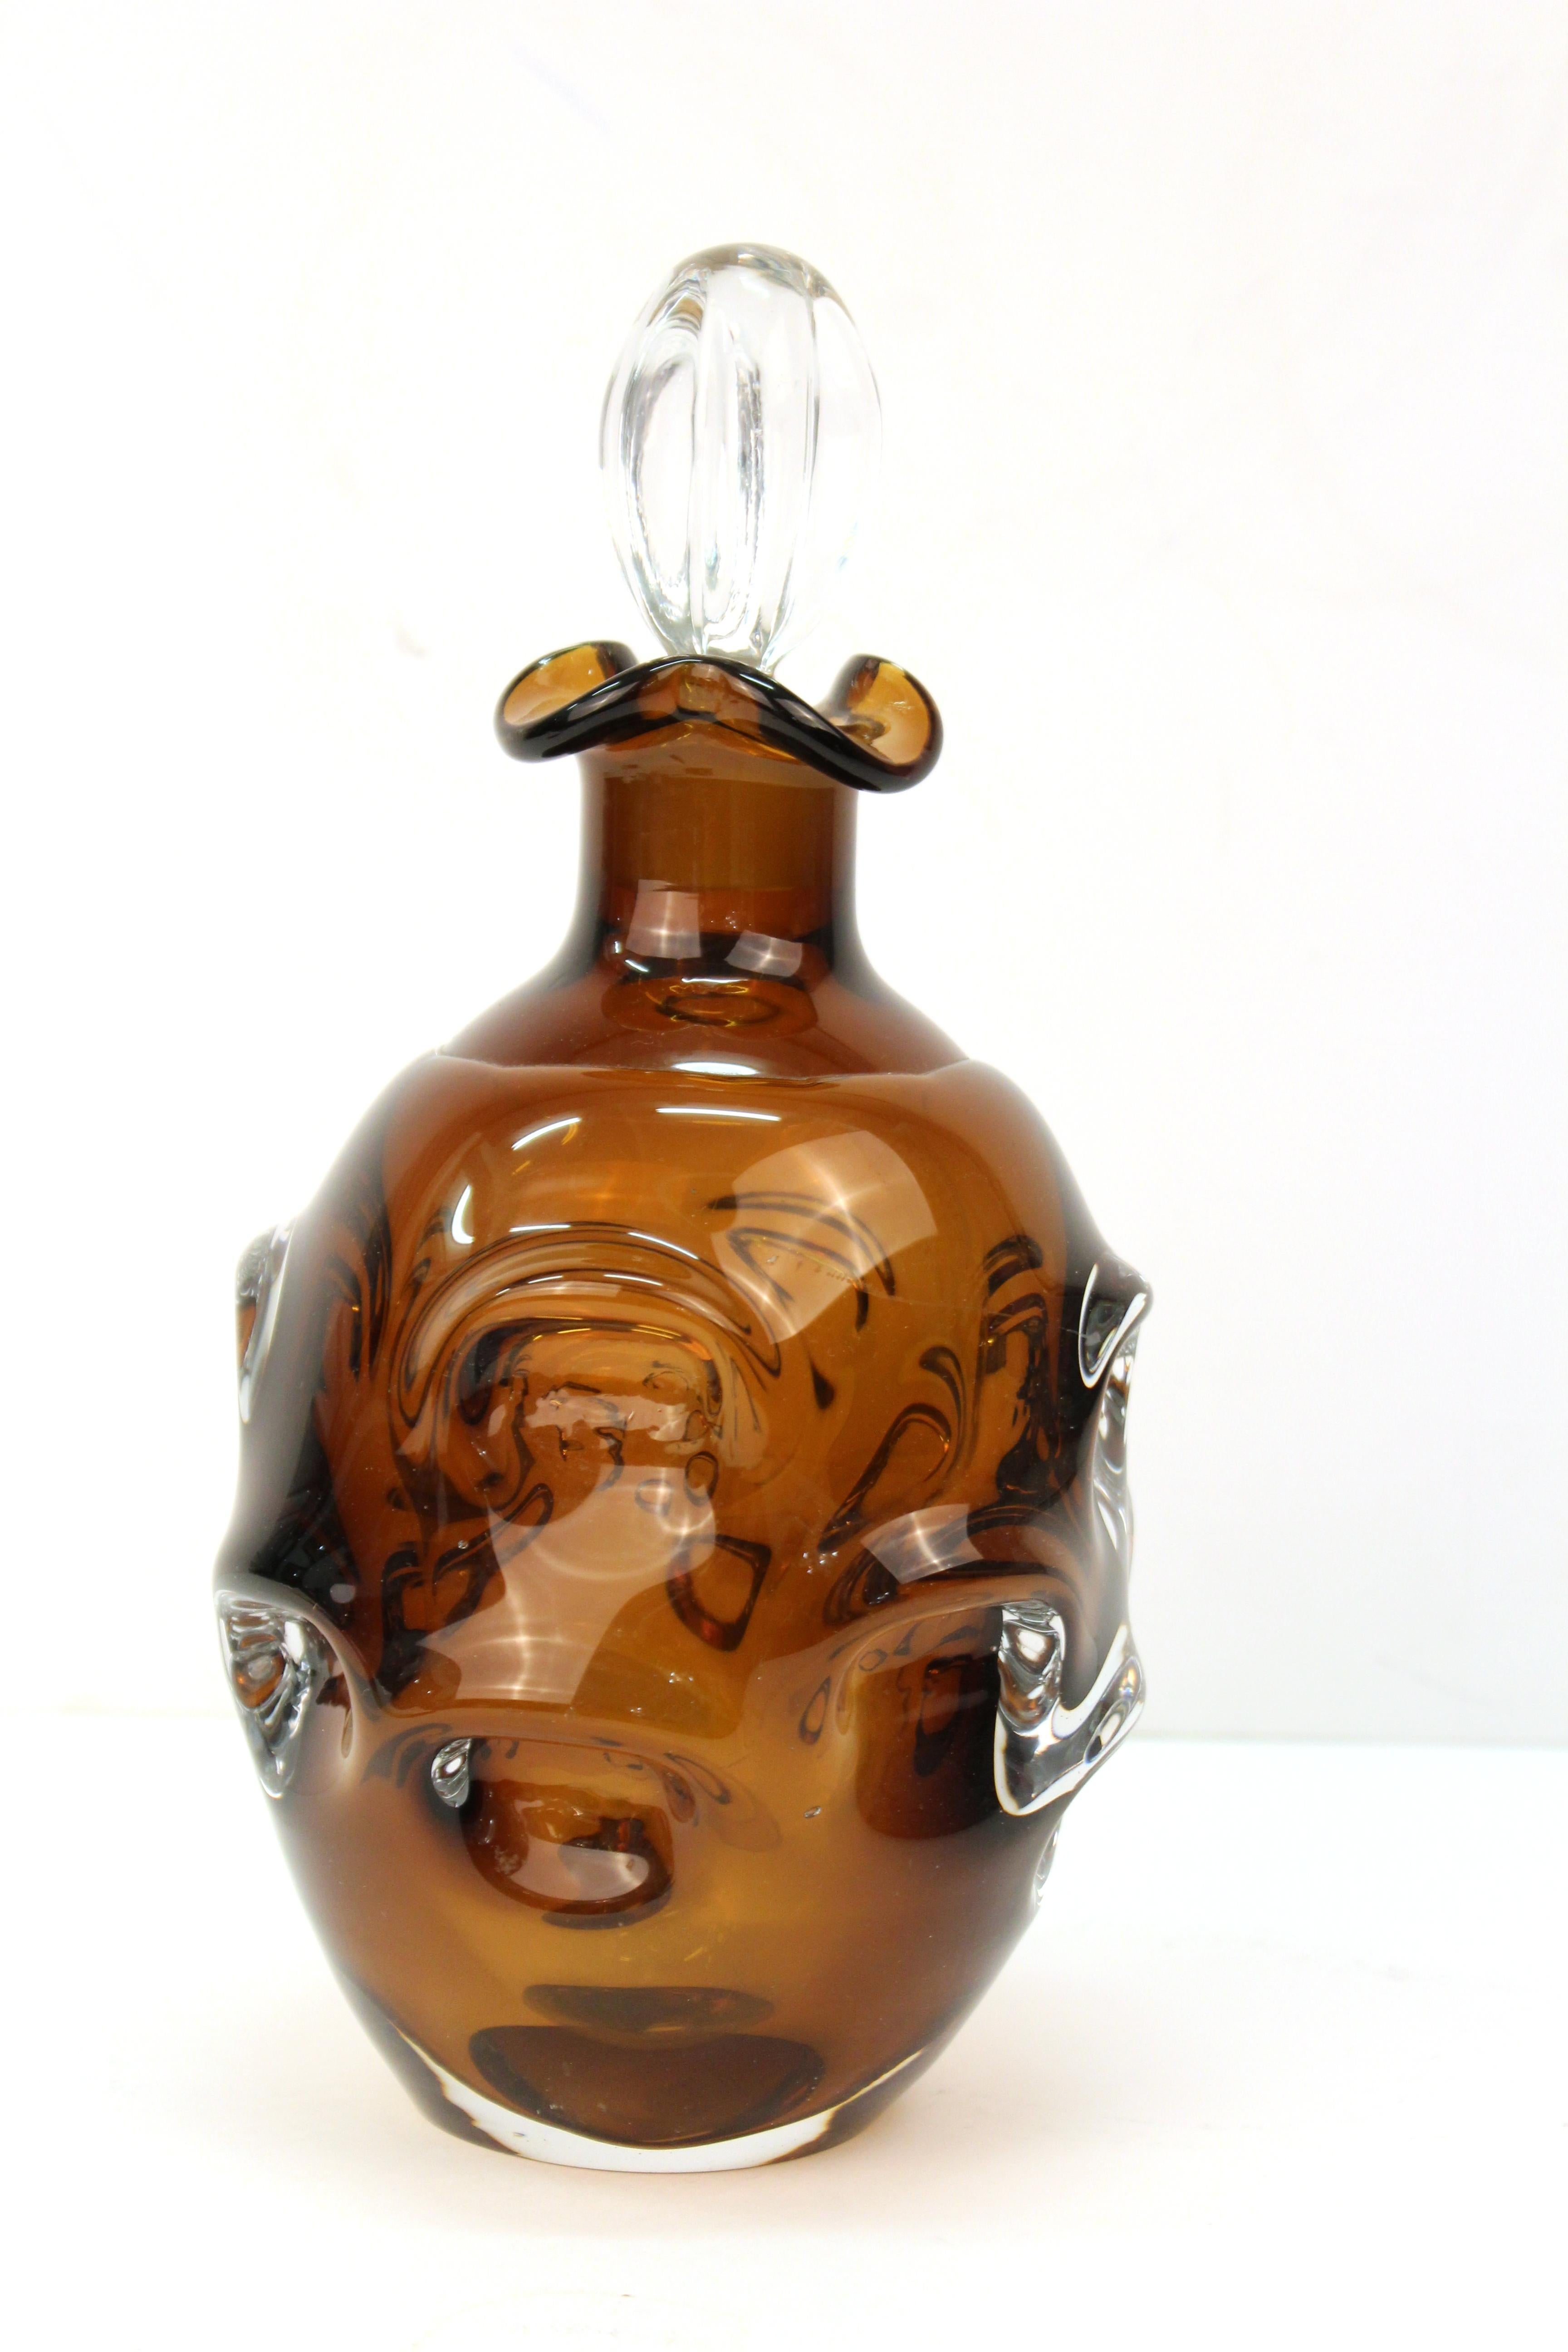 Modern studio art glass decanter with stopper. The piece is made of heavy glass and has a clear glass stopper. In great vintage condition with age-appropriate wear and use.